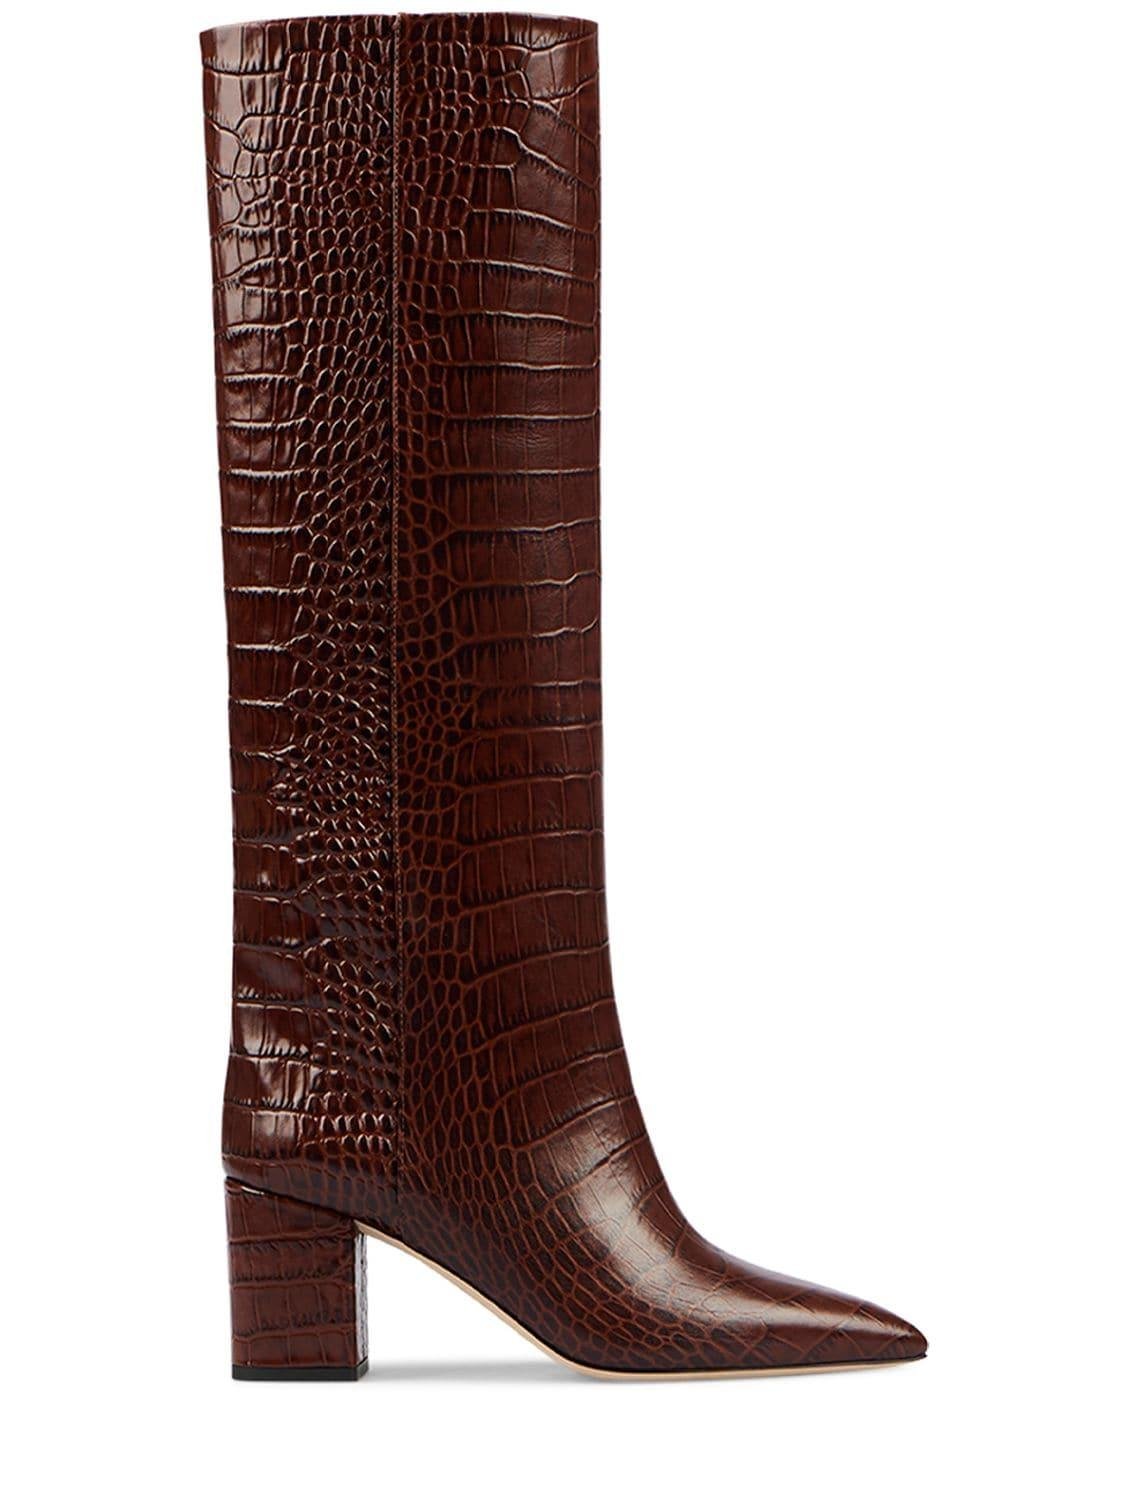 70mm Anja Croc Embossed Tall Boots by PARIS TEXAS